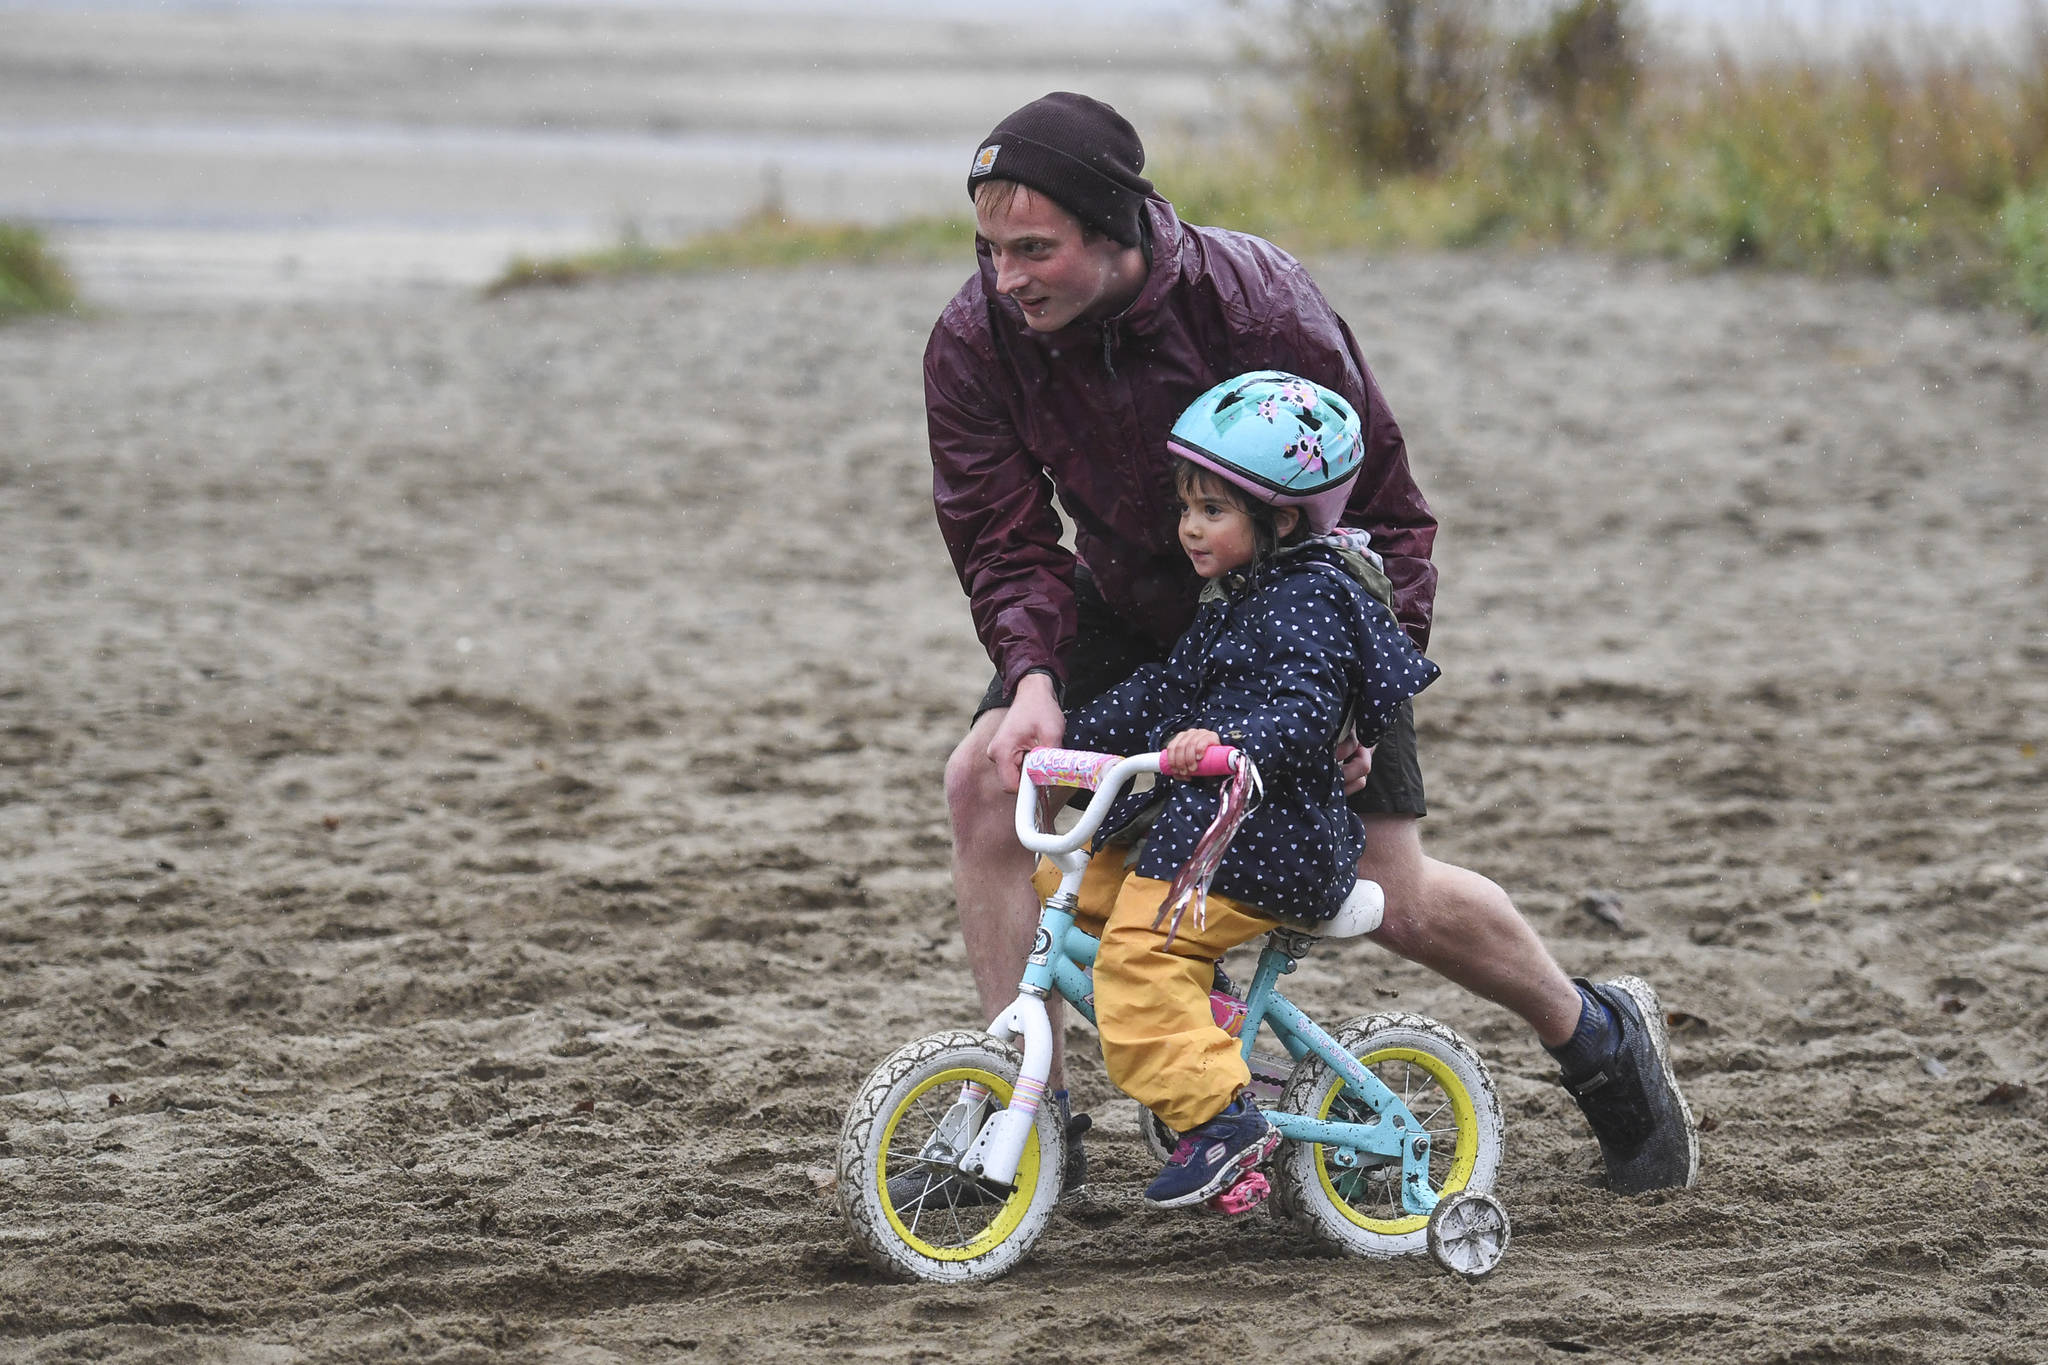 Dylan Kruger helps his daughter, Amelia, 4, at the finish of the Douglas Dirt Derby Youth Bike Race for 5 to 7-year-olds at Savikko Park and the Treadwell Historic Trail on Saturday, Oct. 5, 2019. The event was organized by the Juneau Freewheelers Bicycle Club. (Michael Penn | Juneau Empire)